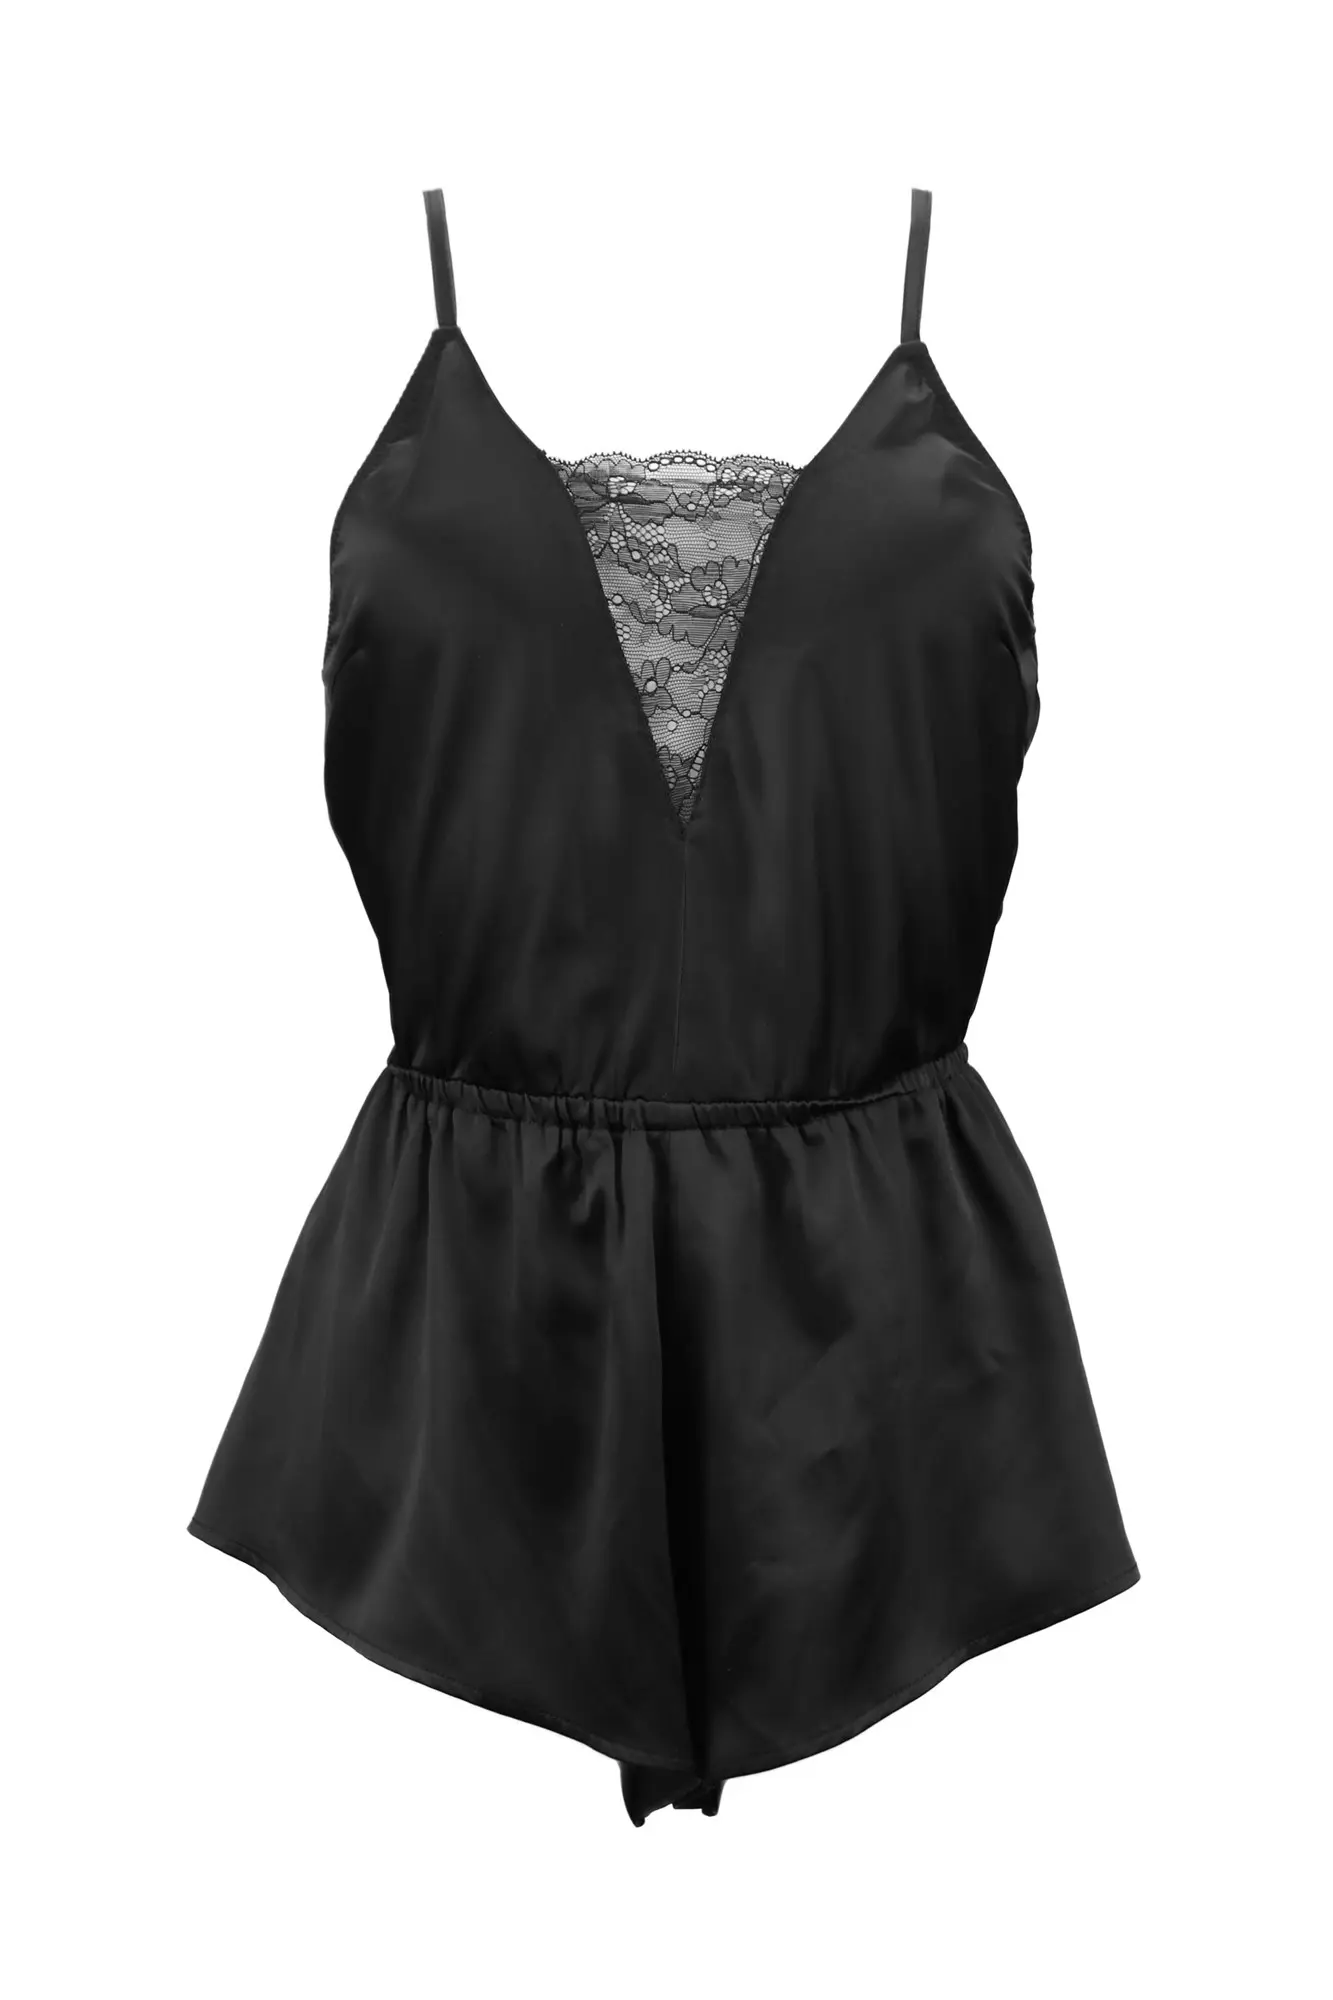 Dusk Satin and Lace Playsuit in Black | Pour Moi Clothing